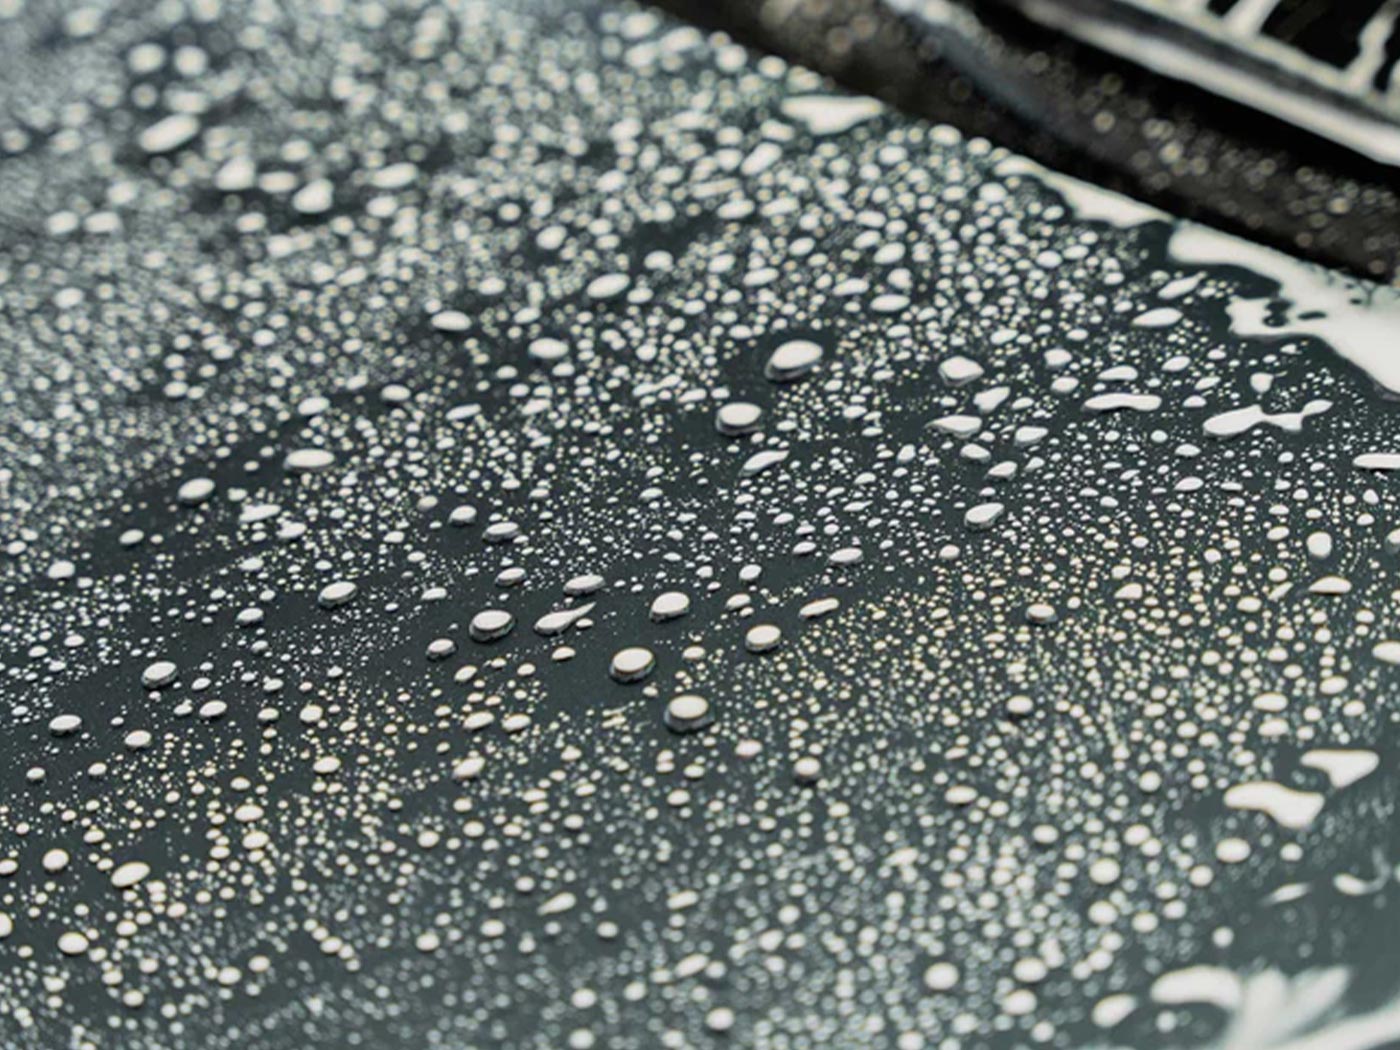 What is SIO2 in car detailing?